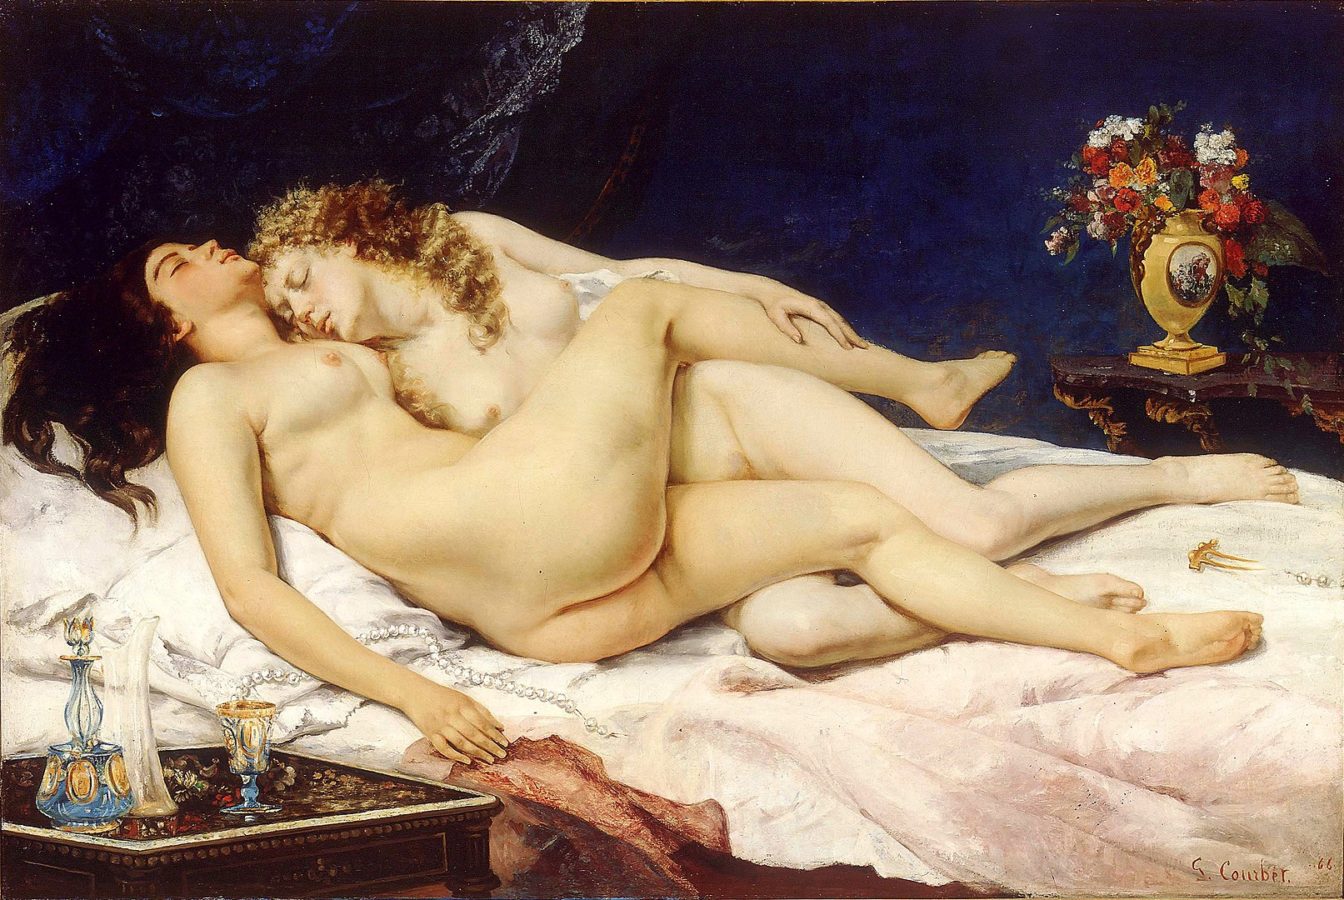  Courbet nudes Gustave Courbet, <em>The Sleepers</em>, 1866, 